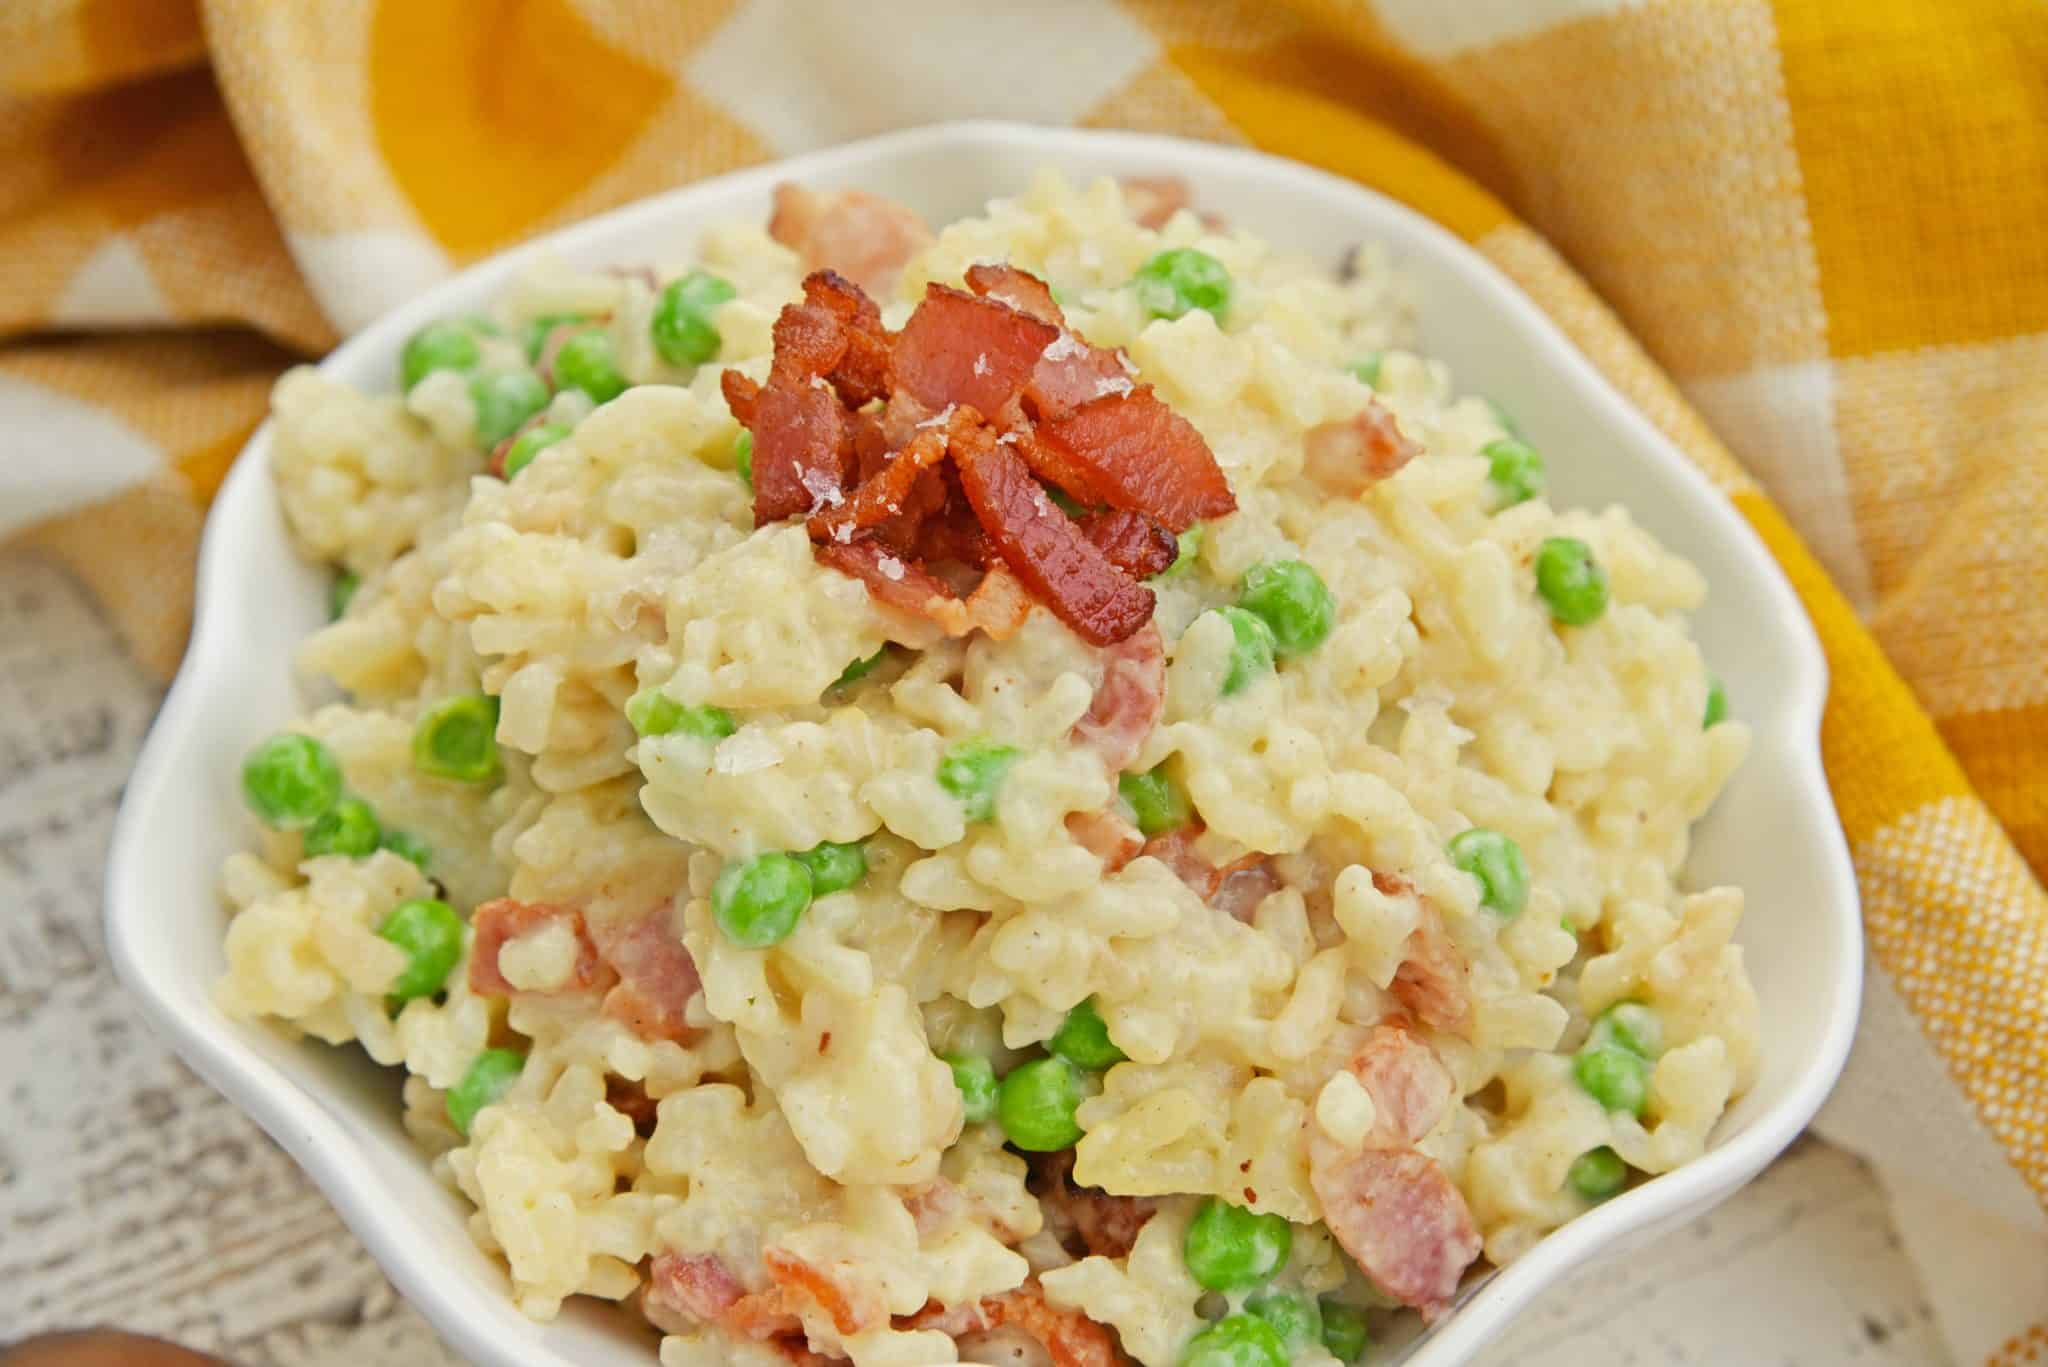 Creamy Parmesan Risotto takes the most traditional risotto recipe and adds vibrant peas and crispy bacon. Sauteed in bacon fat, this rice packs a flavor punch! #parmesanrisottorecipe #easyrisottorecipe www.savoryexperiments.com